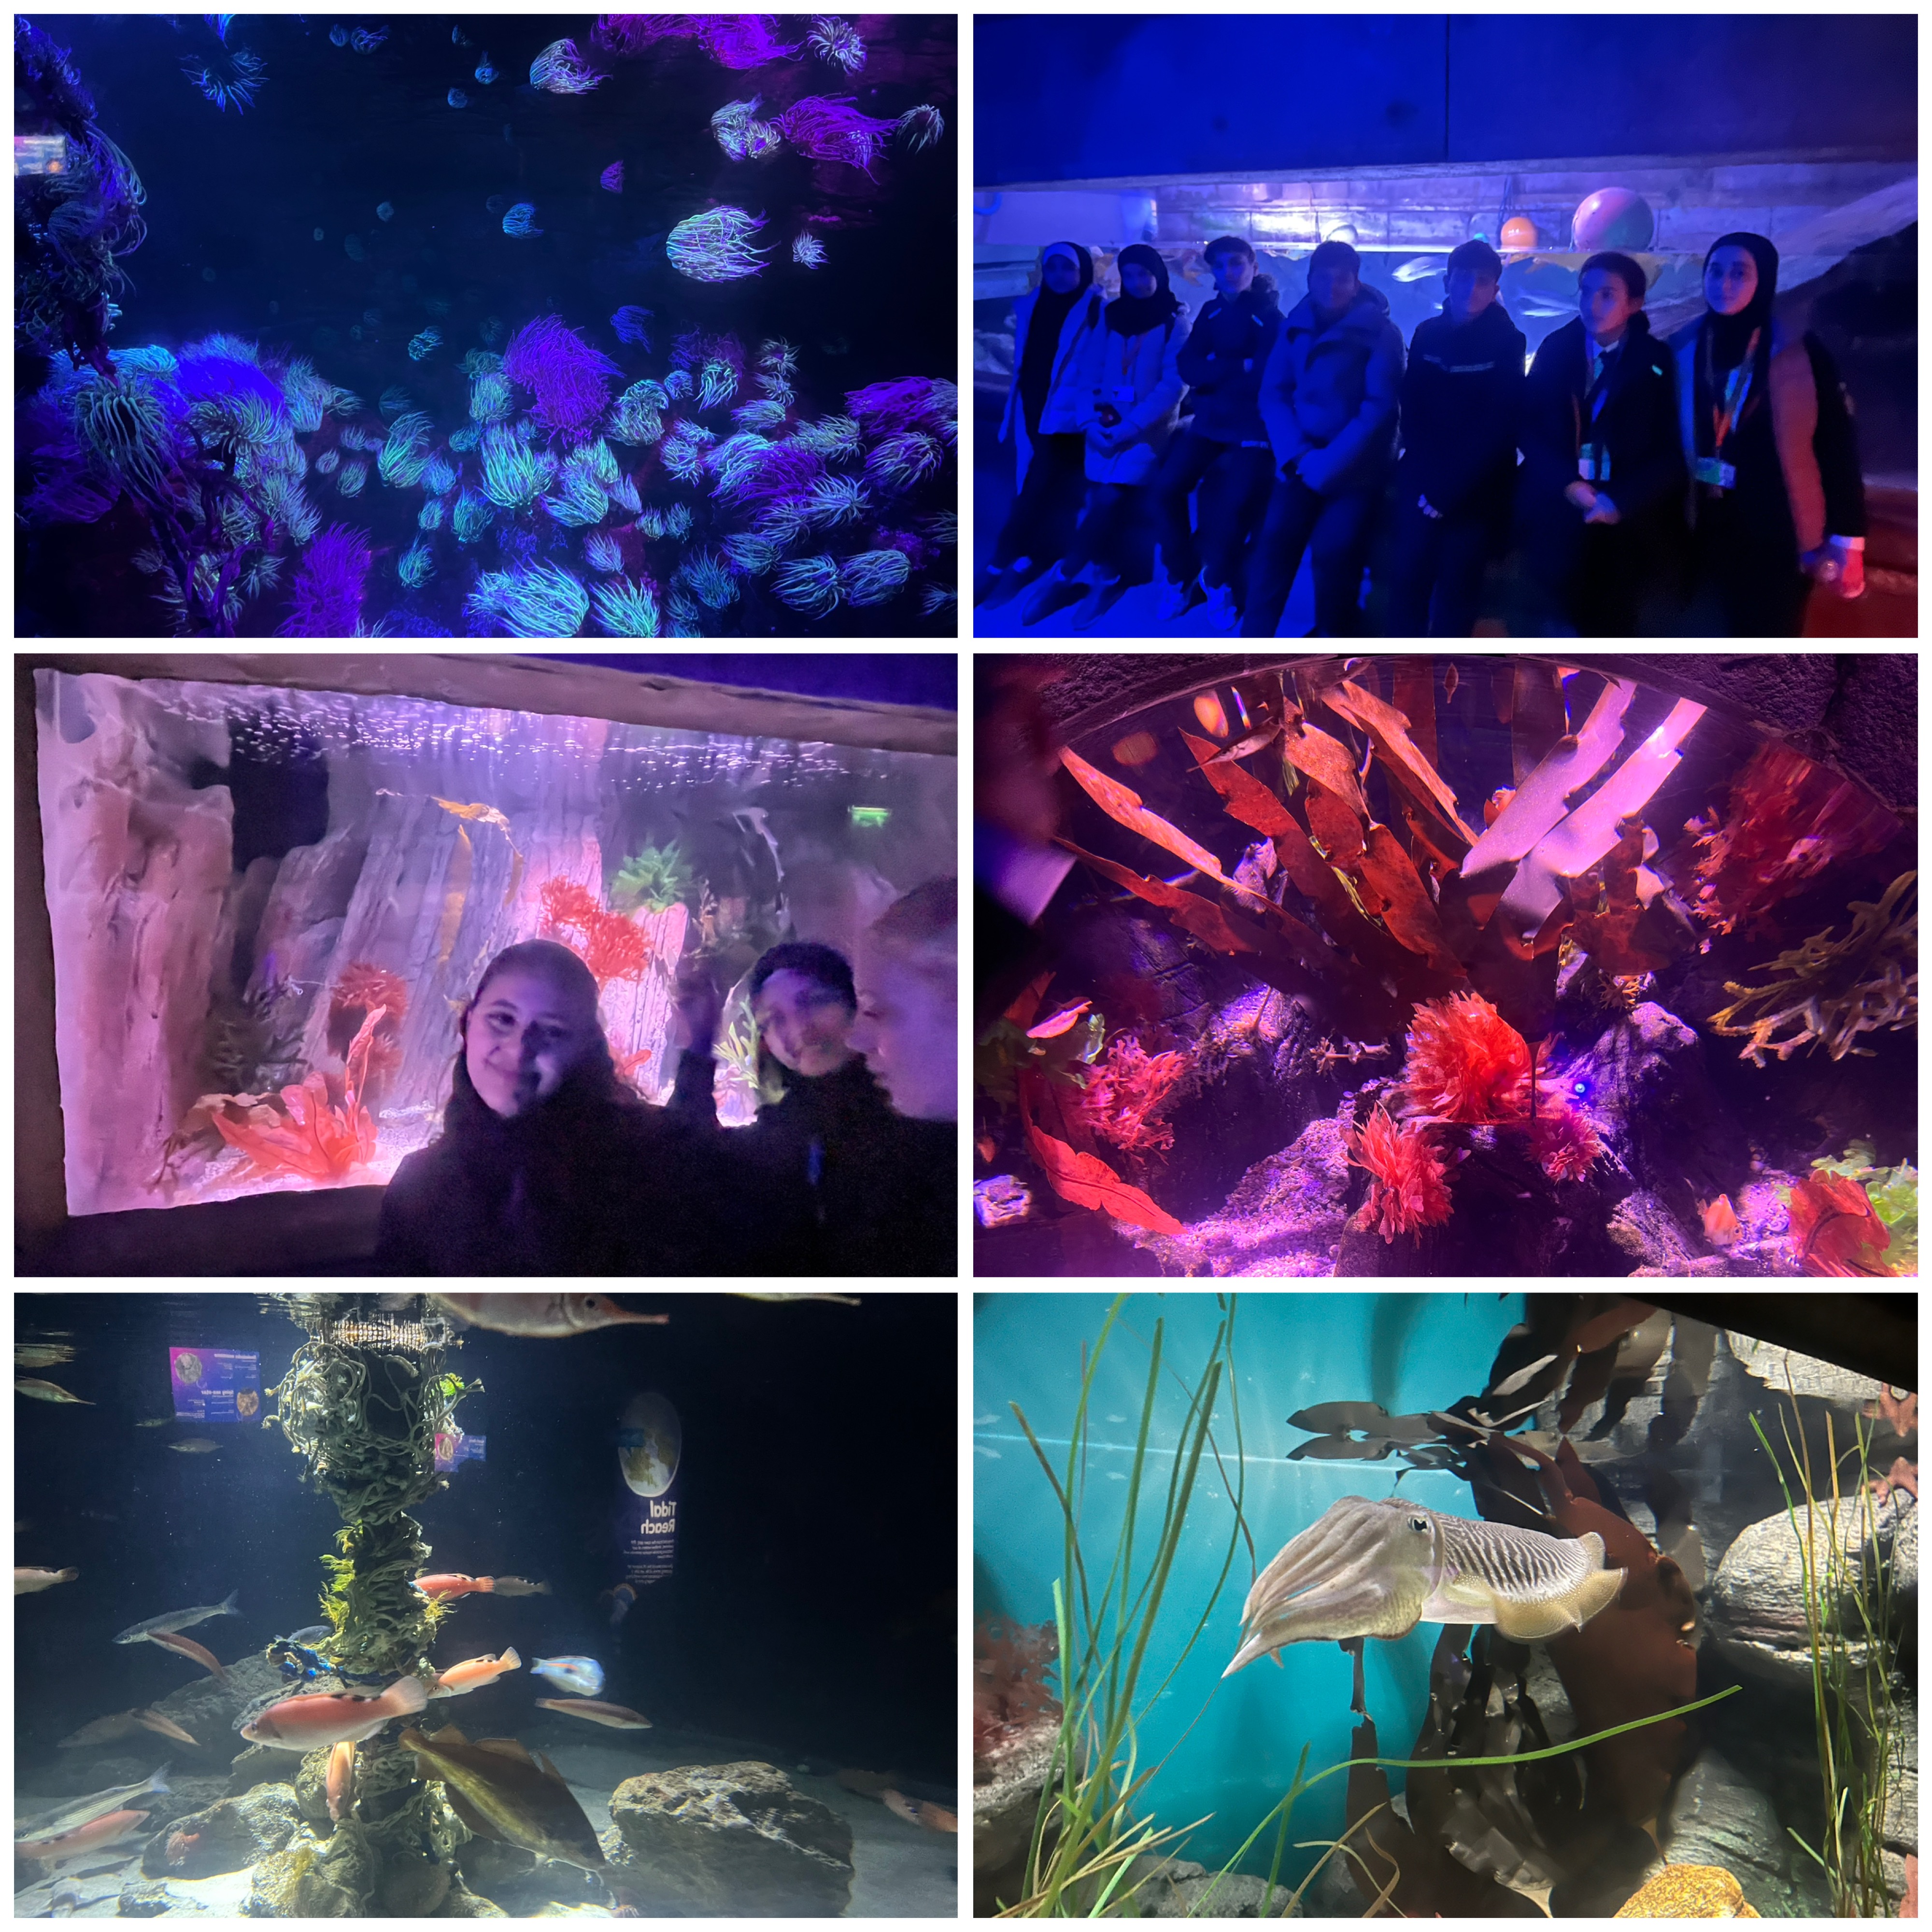 Image for news item 'Year 7 Trip to Sea Life Aquarium and the London Eye'